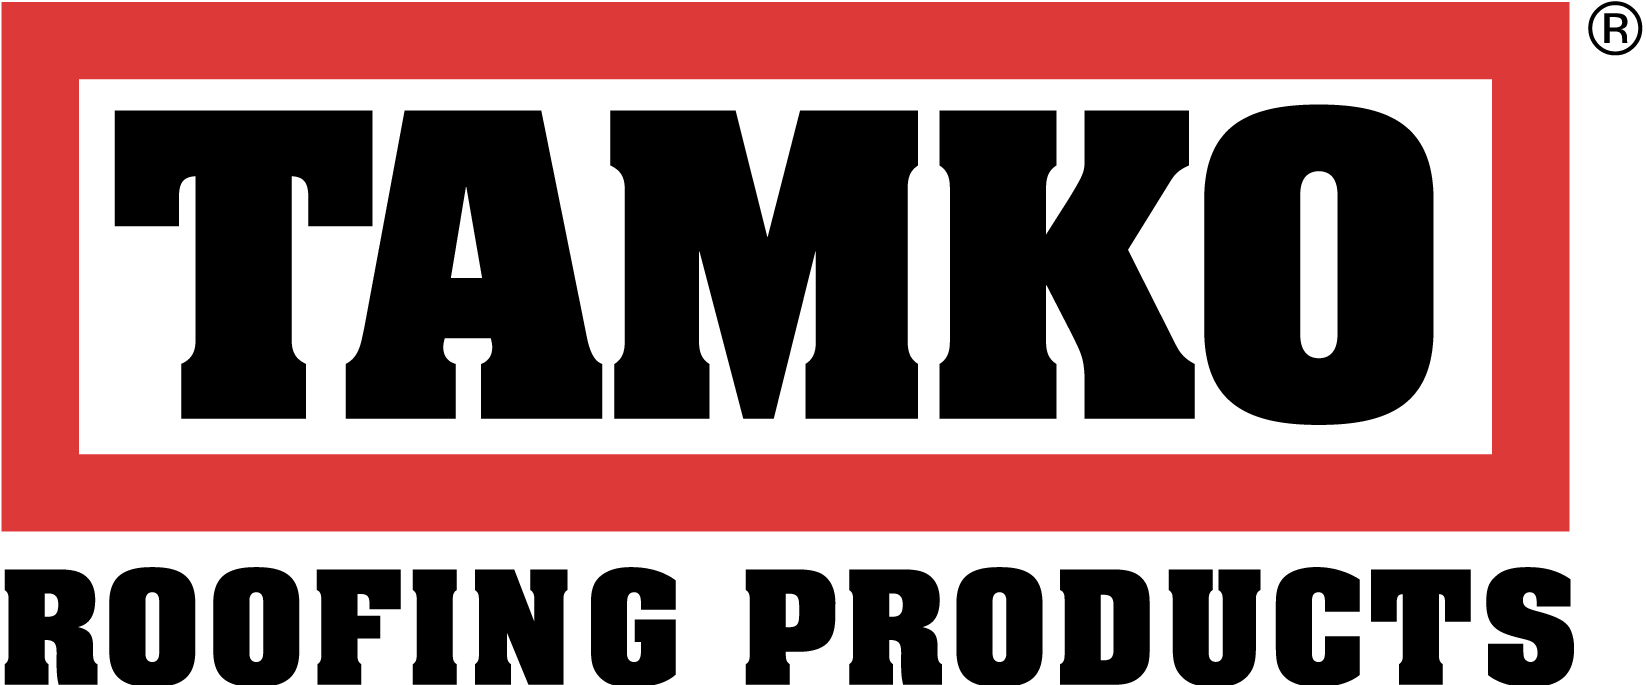 Tamko roofing products logo